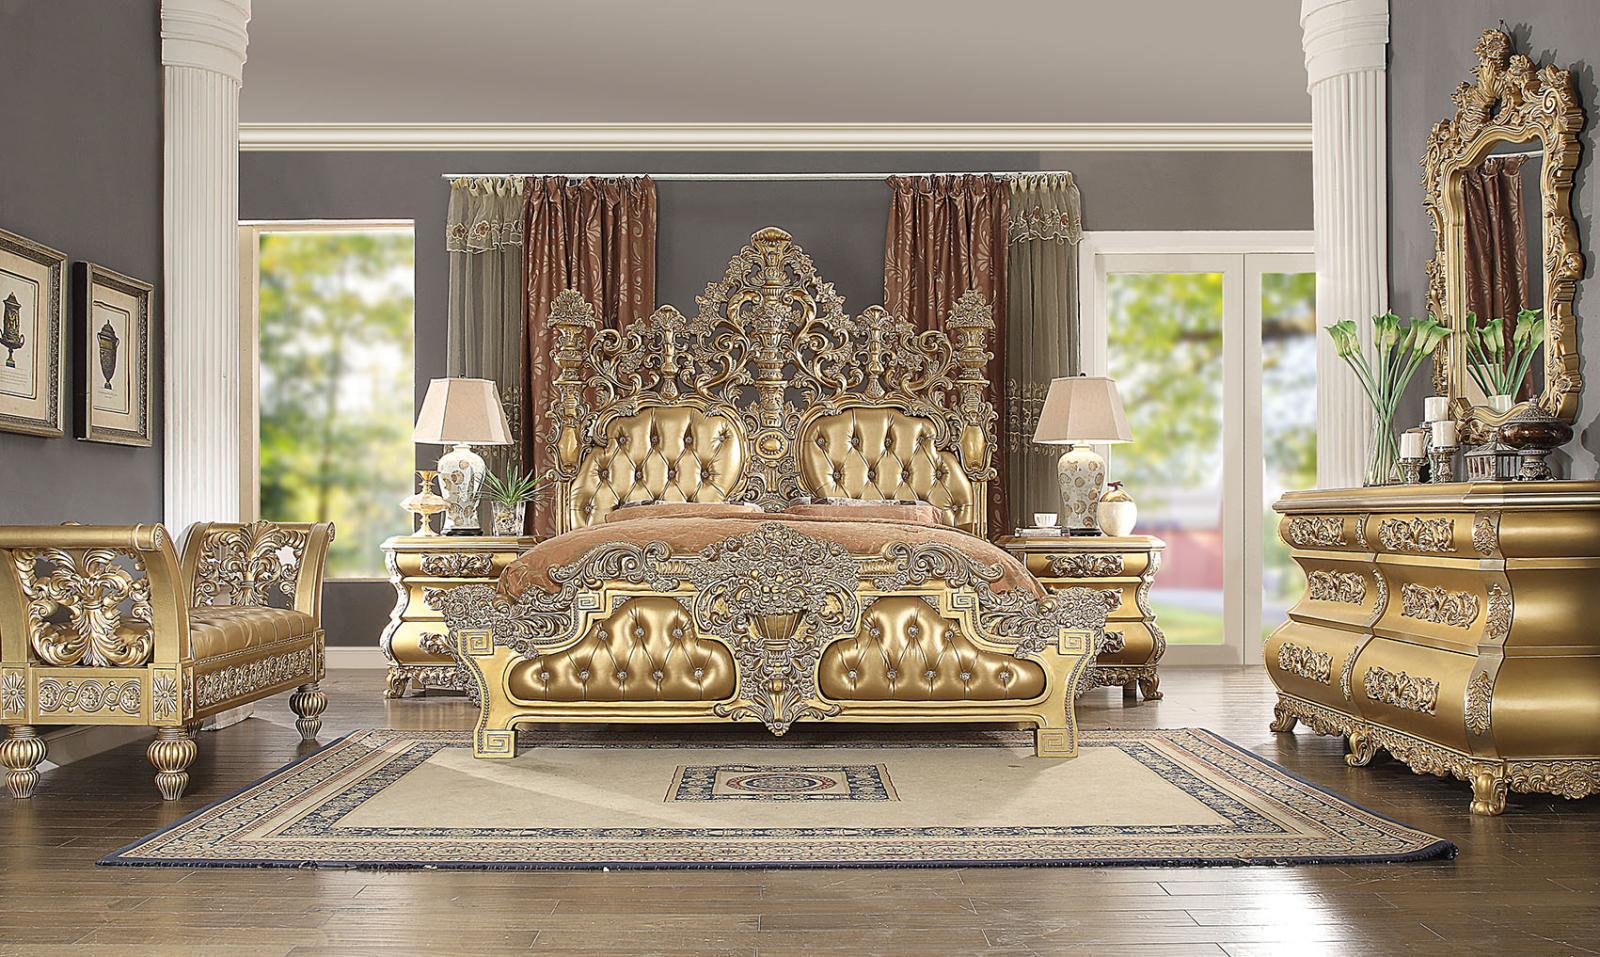 Traditional Panel Bedroom Set HD-8016 – CK BED SET HD-8016-CK-6PC in Rich Gold, Gold Finish Leather